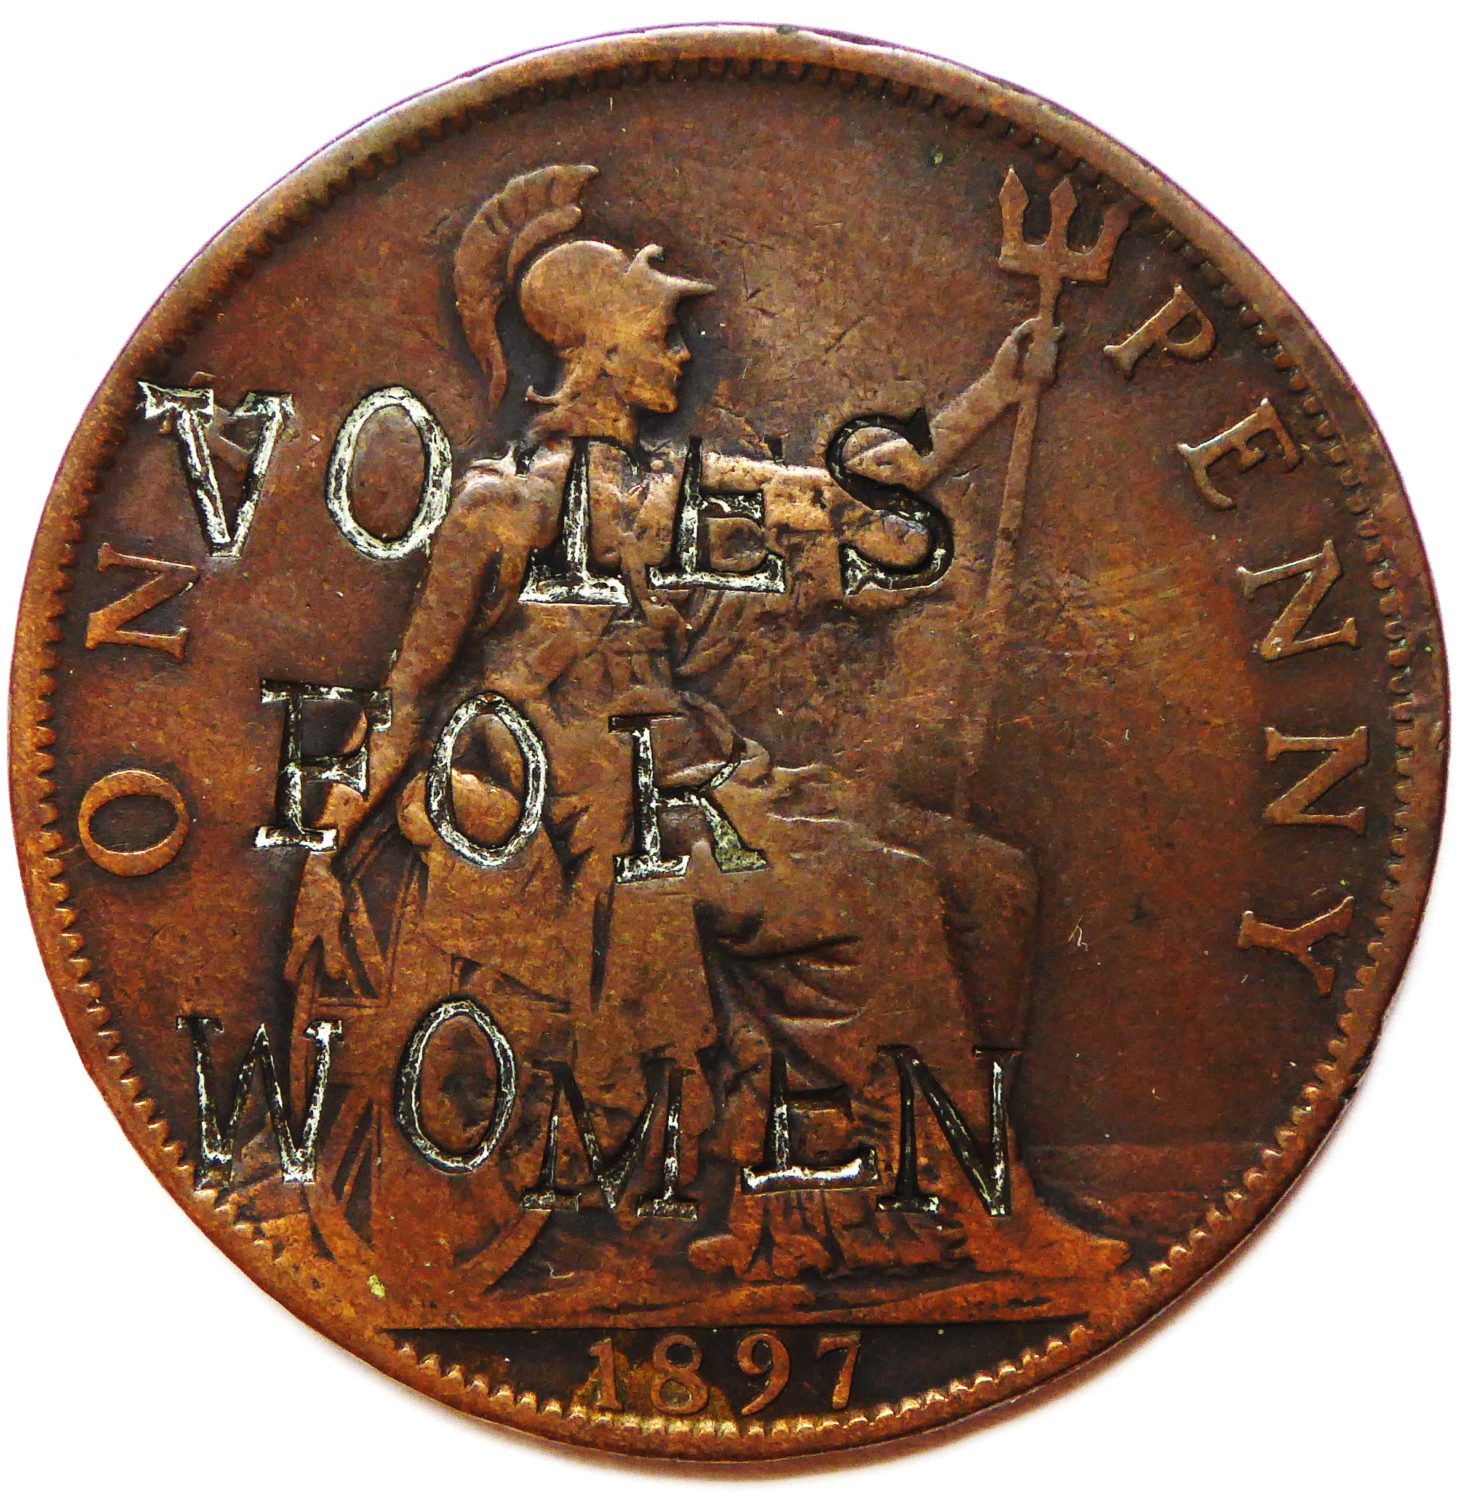 A penny stamped with ' Votes for women' across the front